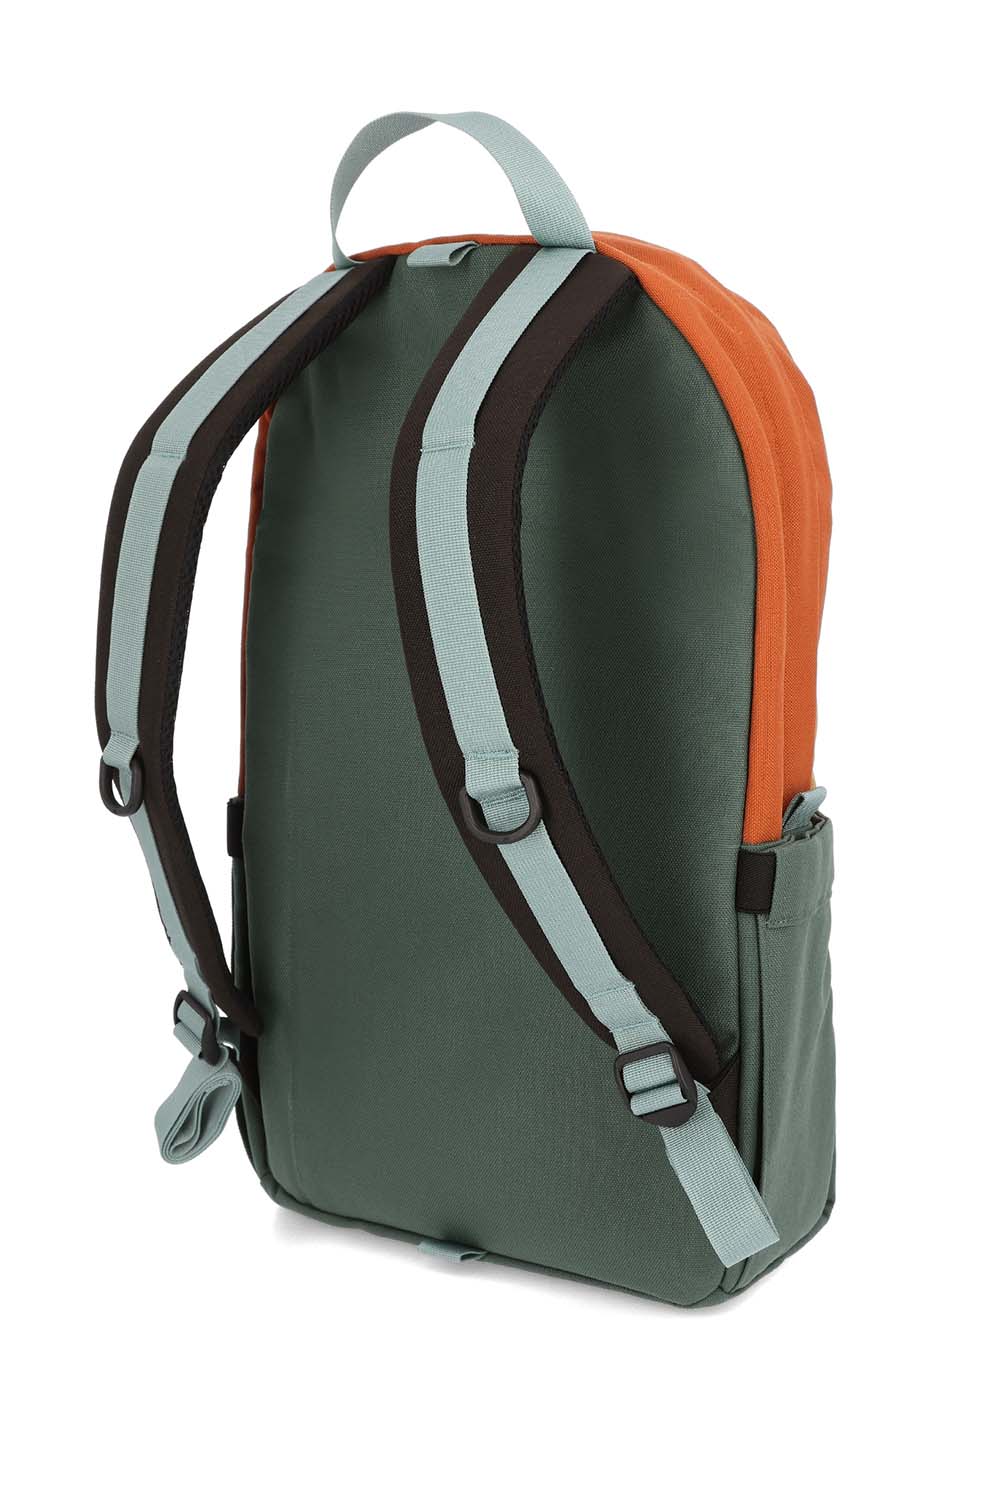 Topo - Daypack Classic - Khaki/Forest/Clay - Back